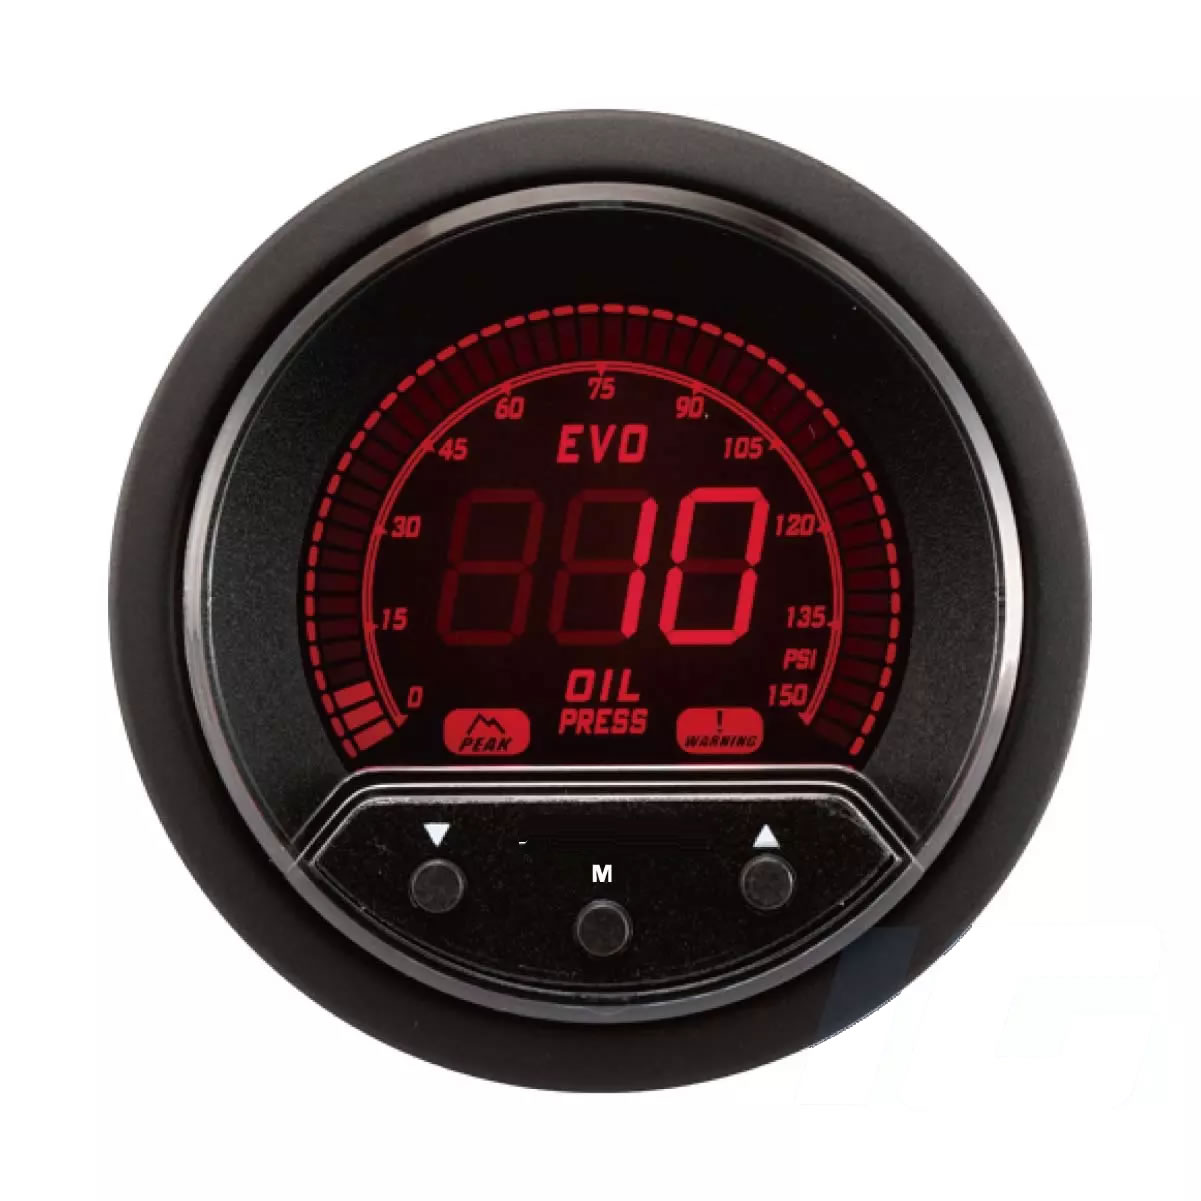 52mm LCD Performance Car Gauges - Oil Pressure Gauge With Sensor and Warning and Peak For Your Sport Racing Car